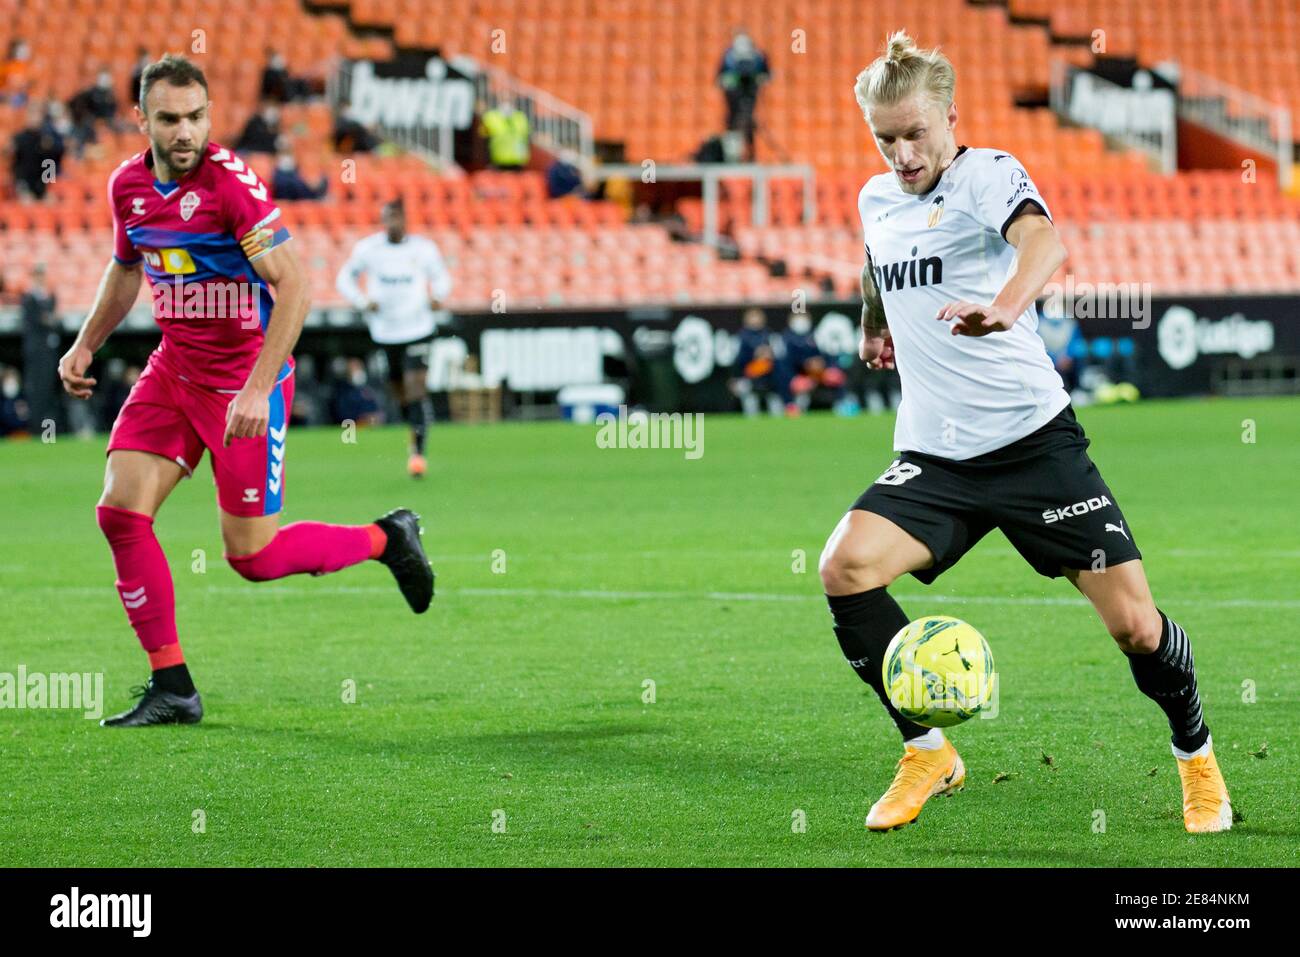 Daniel Wass of Valencia and Gonzalo Verdu of Elche are seen in action during the Spanish La Liga football match between Valencia and Elche at Mestalla Stadium.(Final score; Valencia 1:0 Elche) Stock Photo